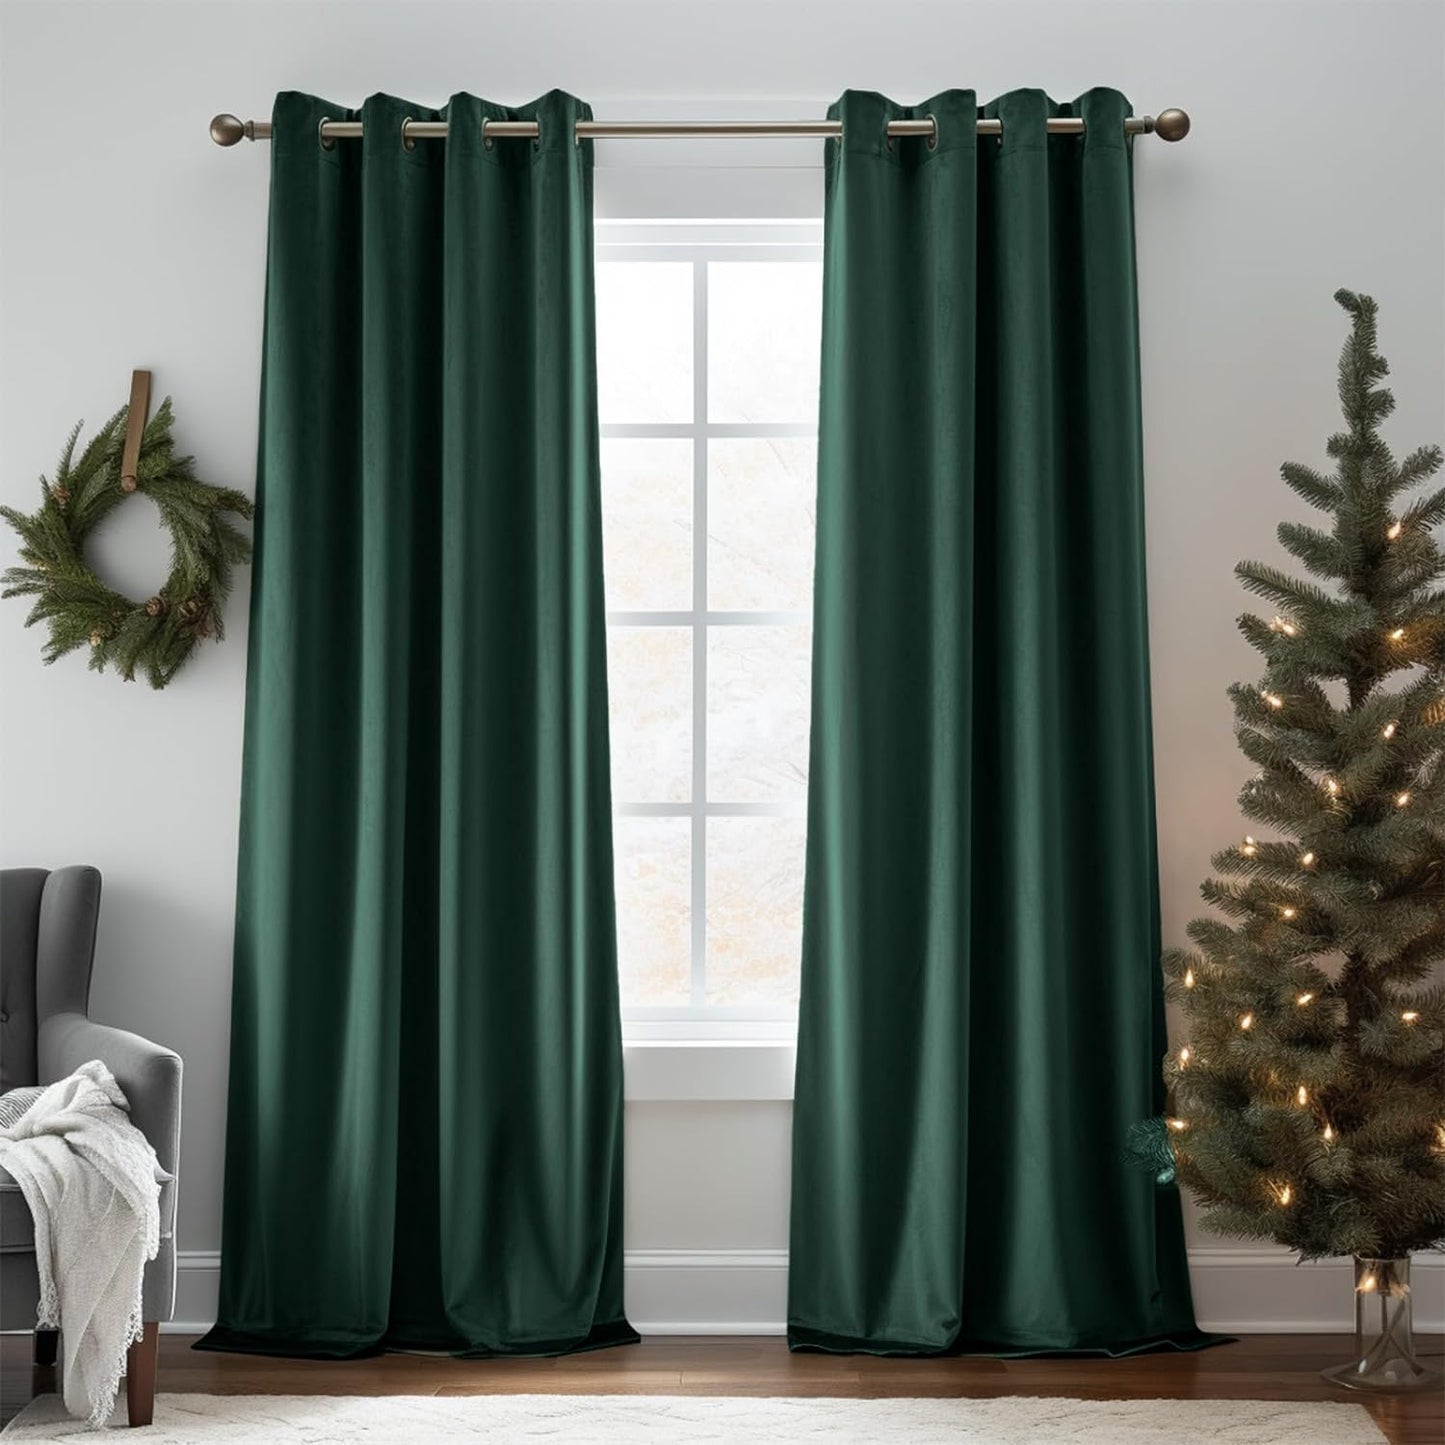 Lazzzy Brown Velvet Blackout Curtain Thermal Insulated Curtain Soft Luxury Noise Reducing Velvet Window Drape for Kids Bedroom Living Room Darkening Drape 96 Inch Long 1 Panel Gold Brown  TOPICK *Grommet | Emerald Green W52 X L96 